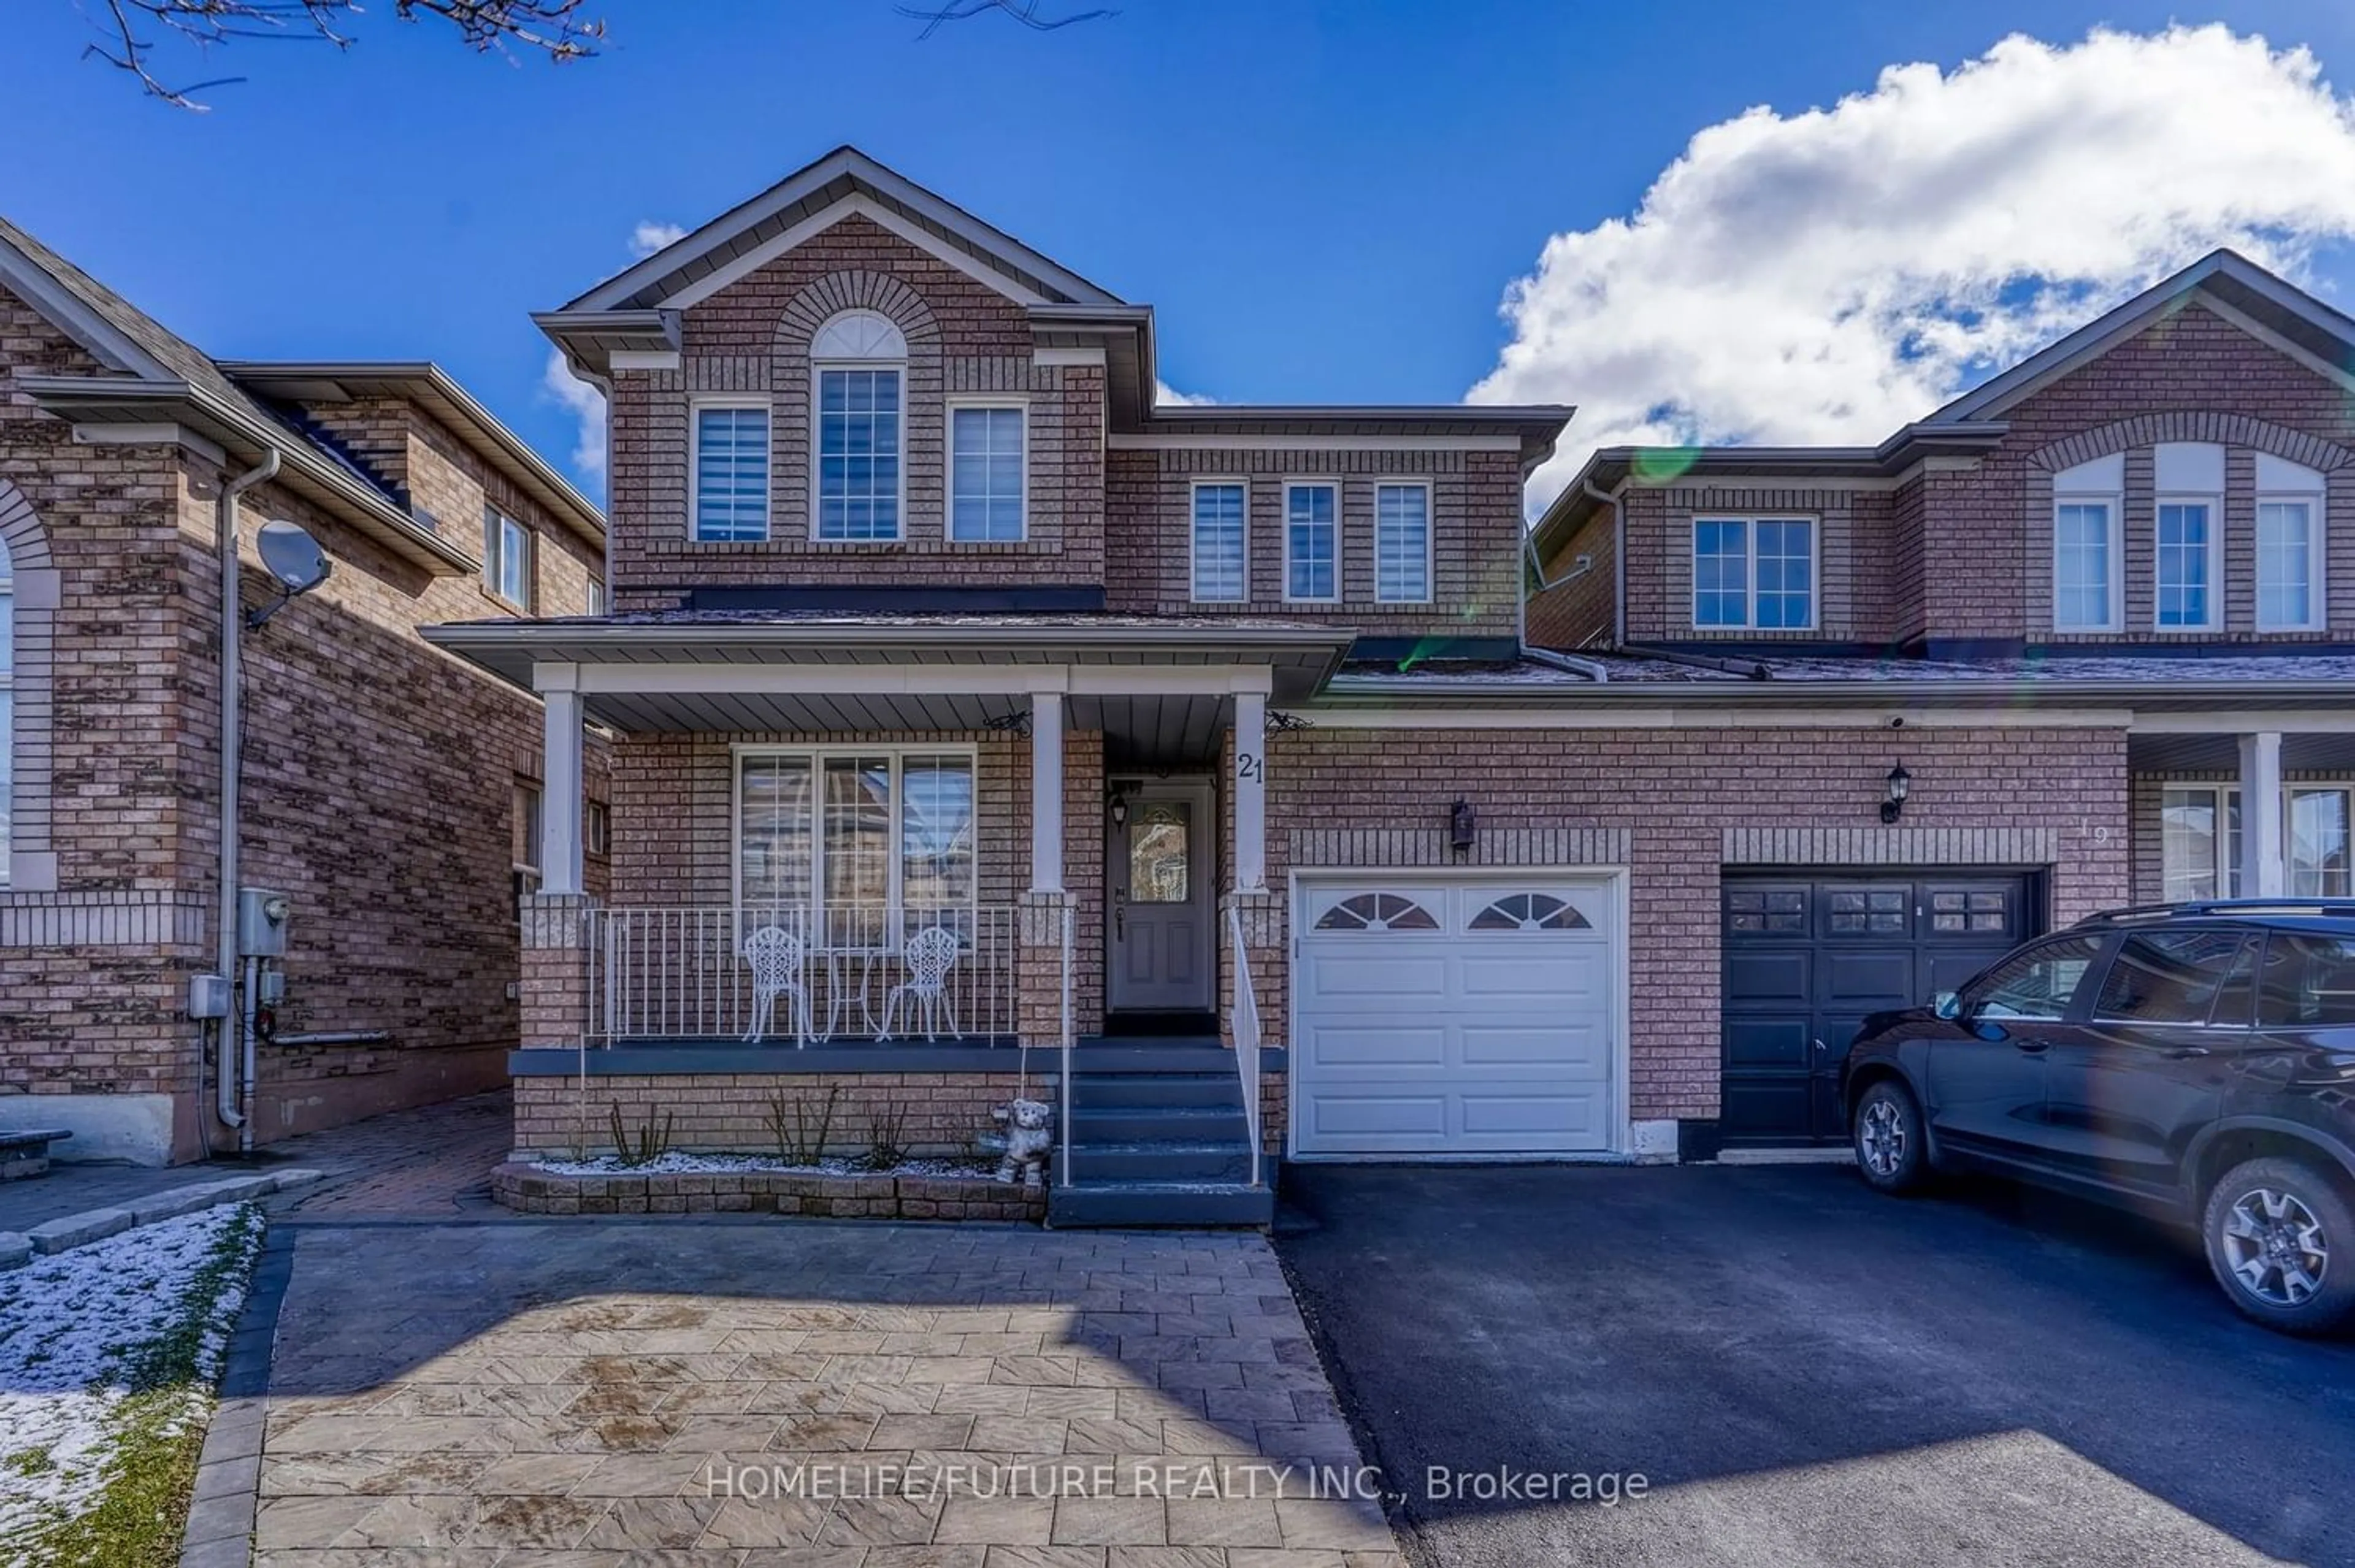 Home with brick exterior material for 21 Cape Verde Way, Vaughan Ontario L6A 2Y6